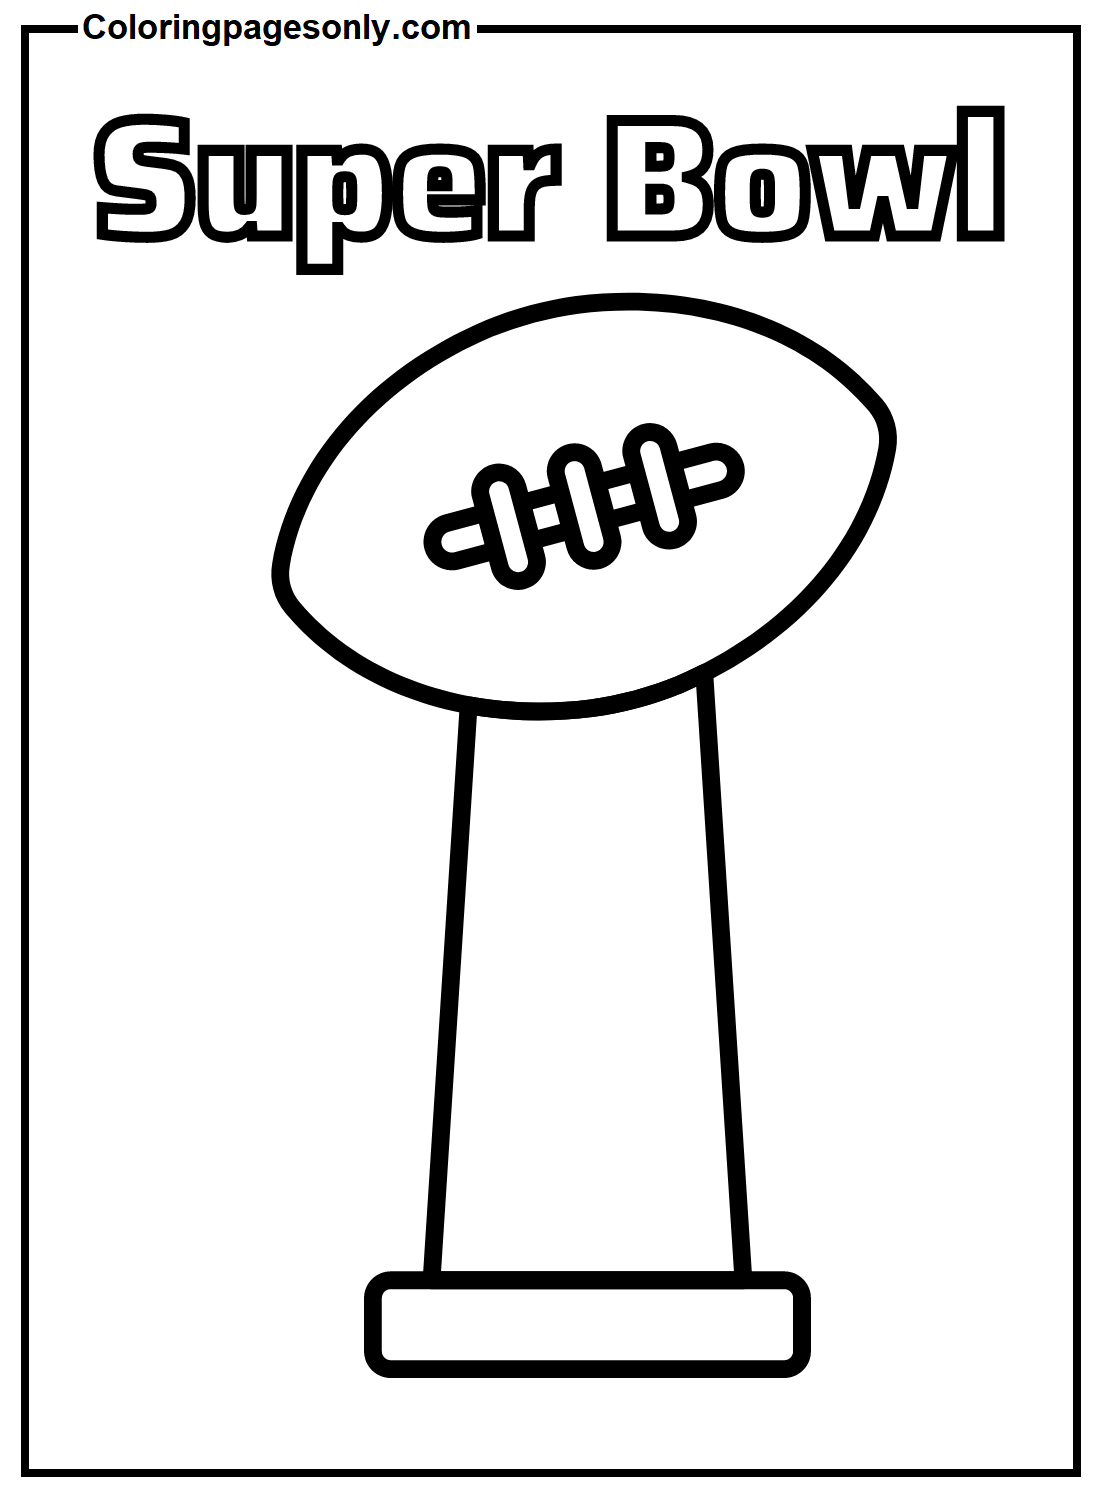 Super Bowl Cup Image from Super Bowl 2024